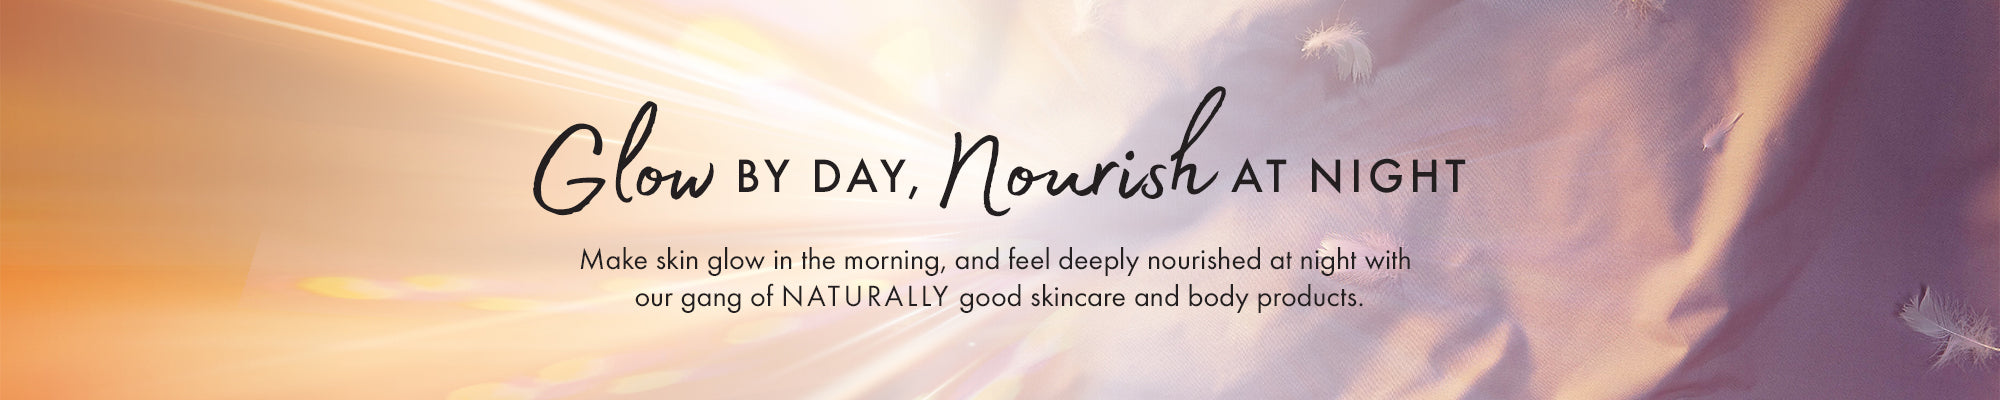 glow by day, nourish at night